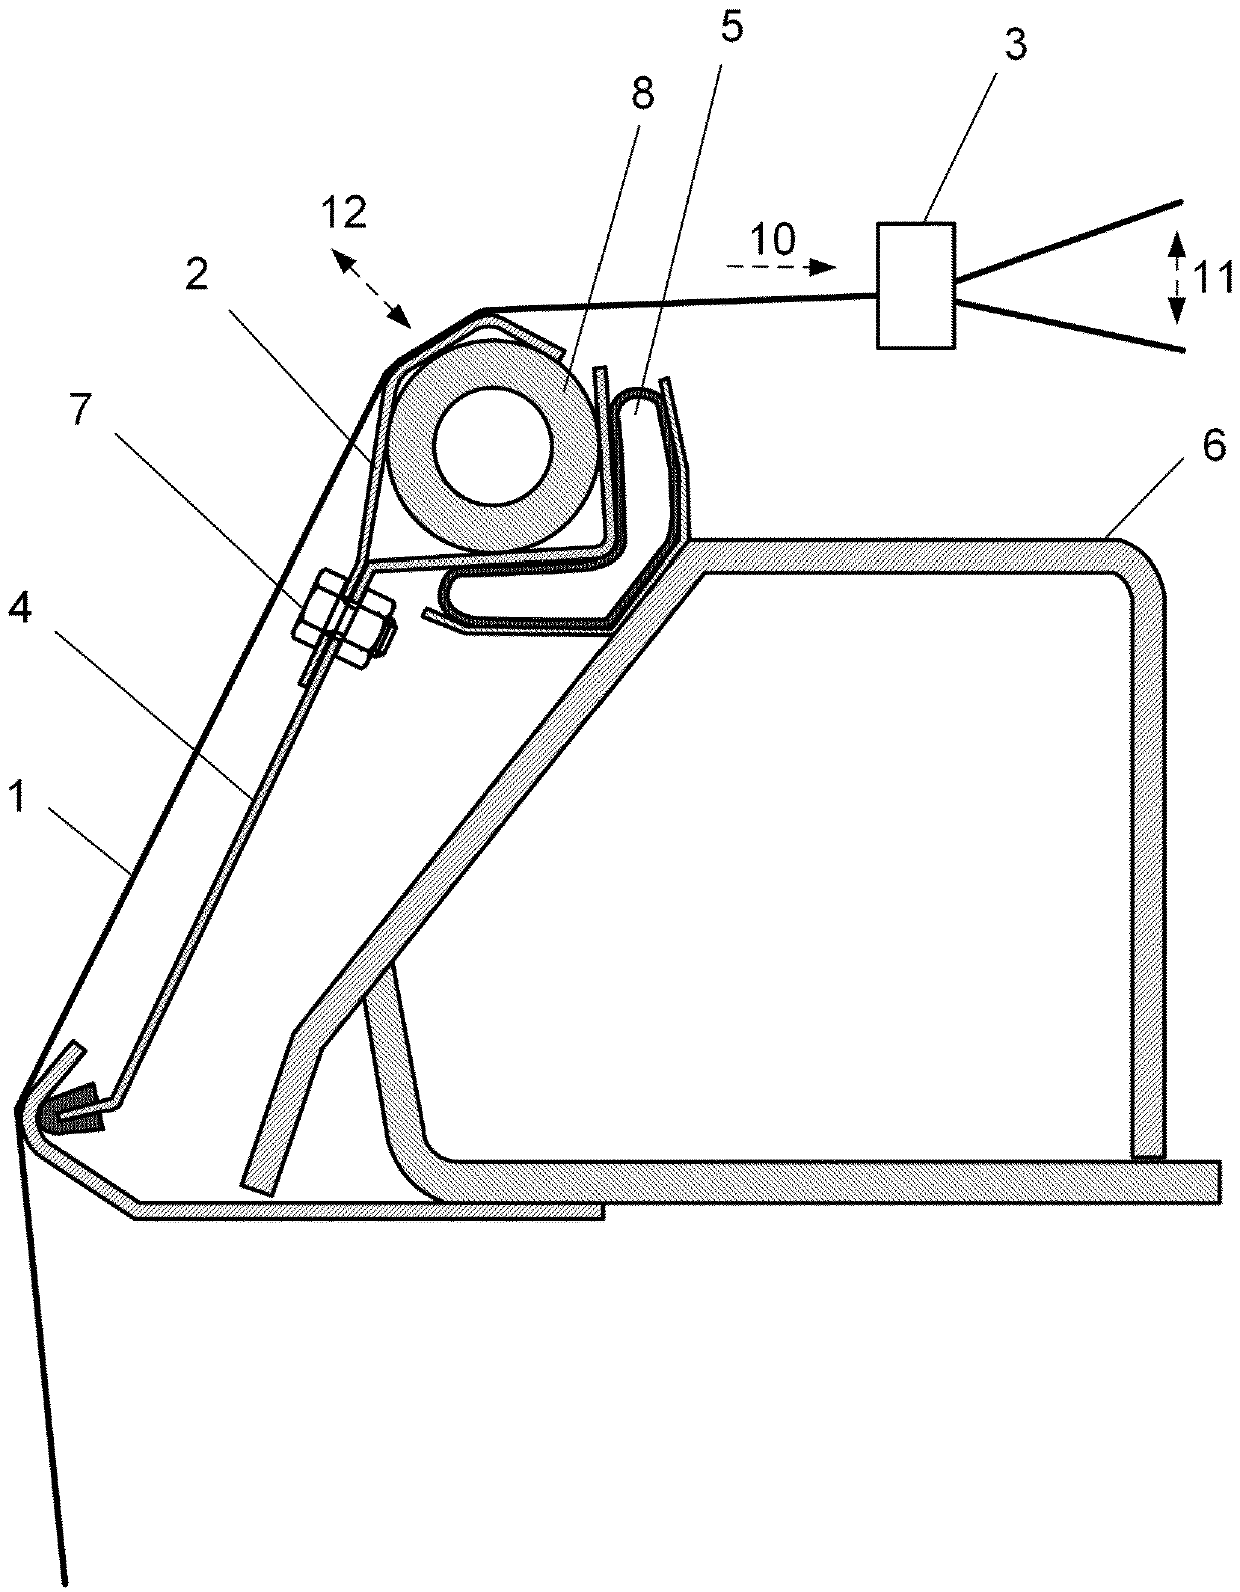 Method and device for changing the dynamic behaviour of a back rest of a weaving machine